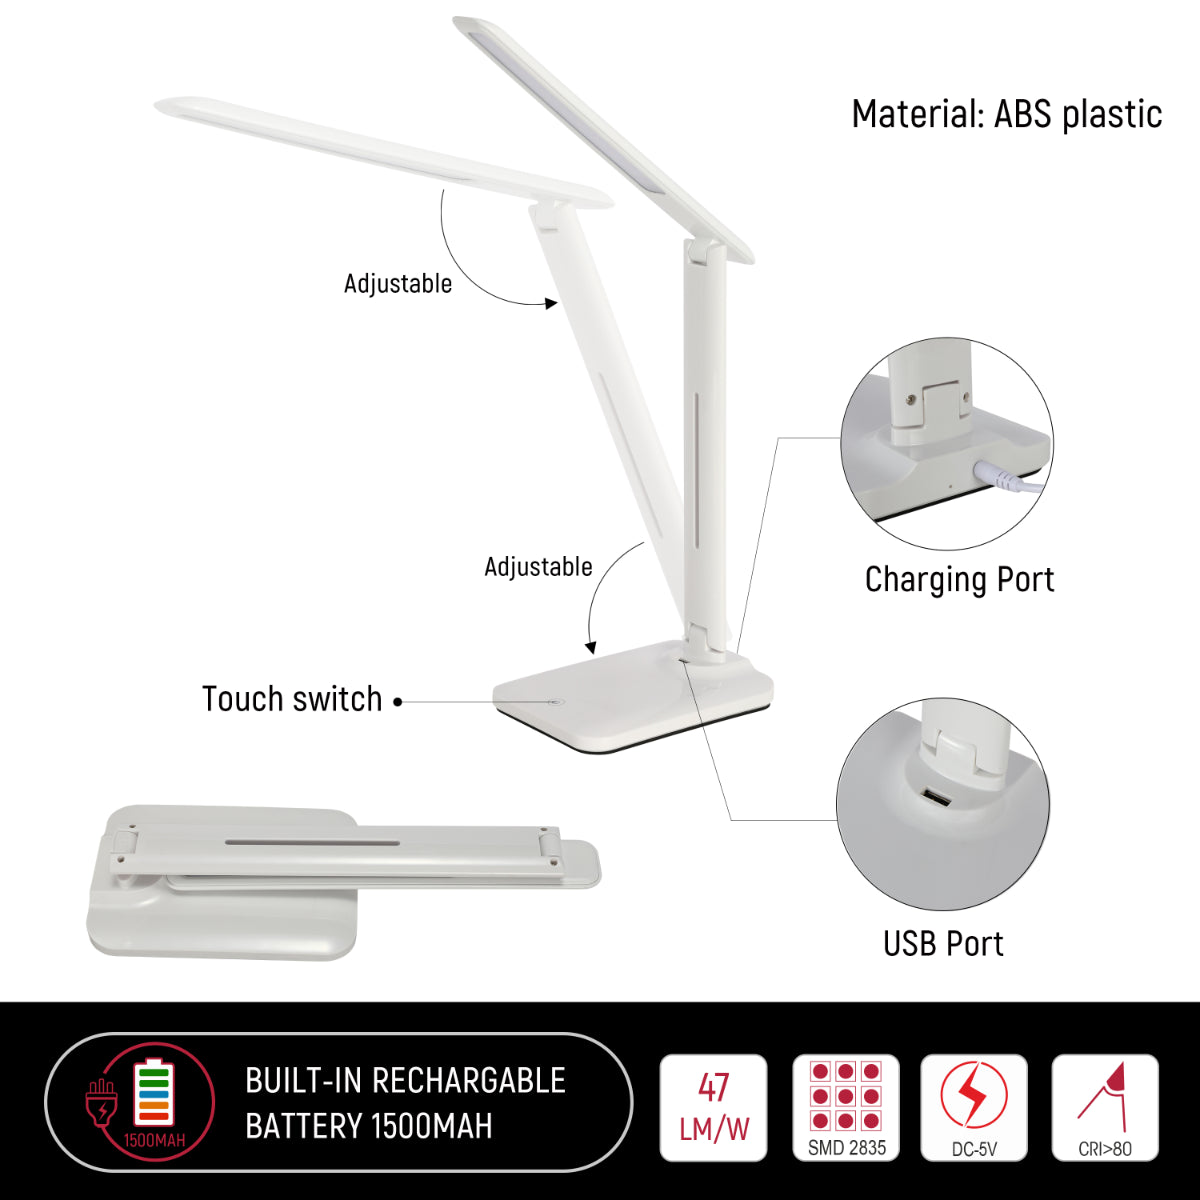 Technical specs of Foldable LED Desk Lamp with USB Phone Charging Feature 130-03763